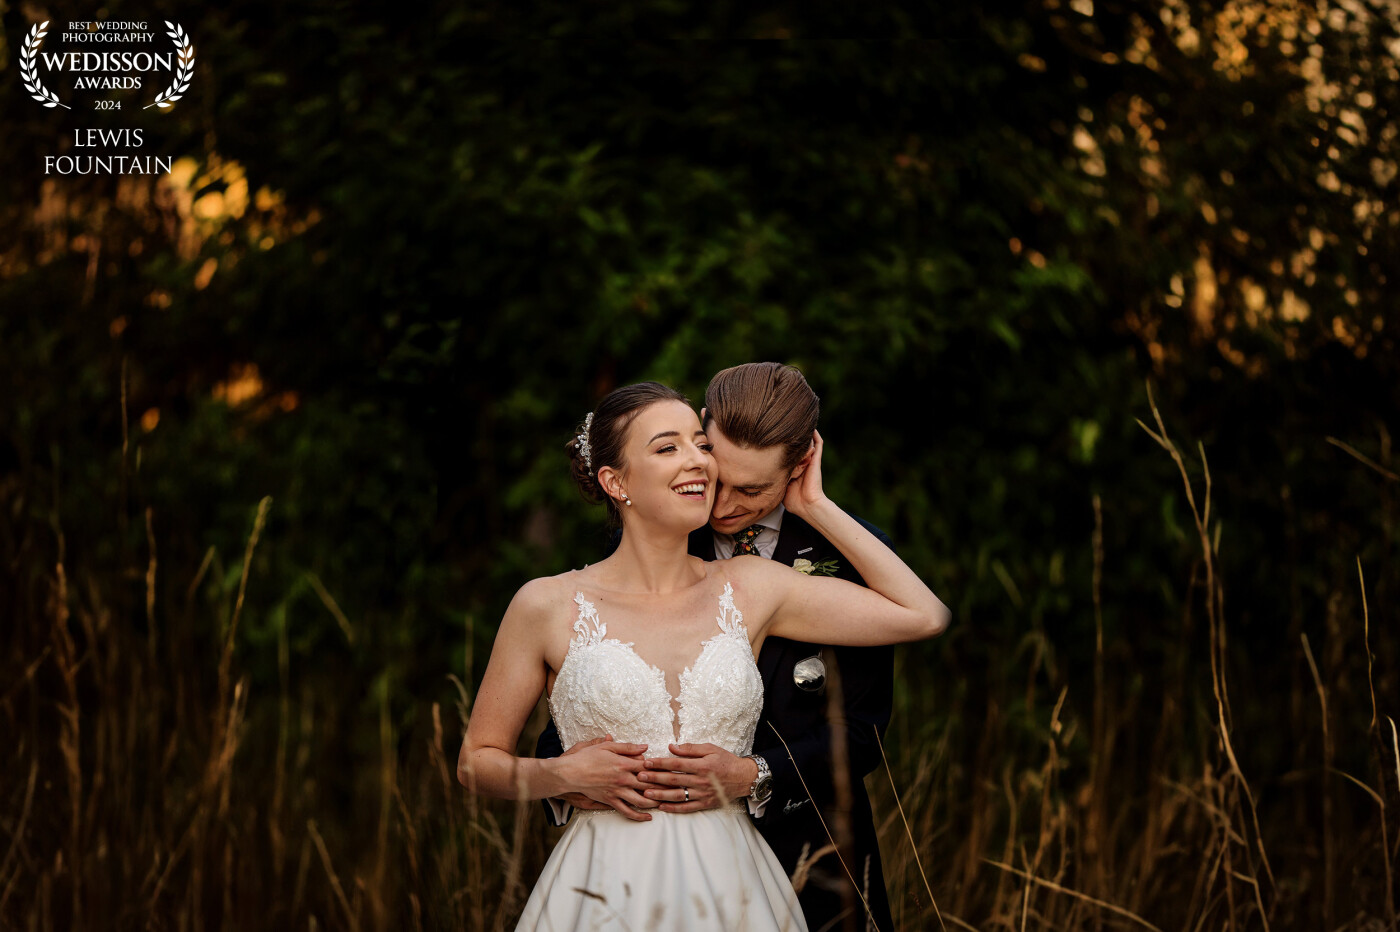 Rebecca and Adam had an awesome wedding day at Lanwade Hall near Newmarket.<br />
They knew exactly what style of images they wanted, with a priority of romantic yet natural